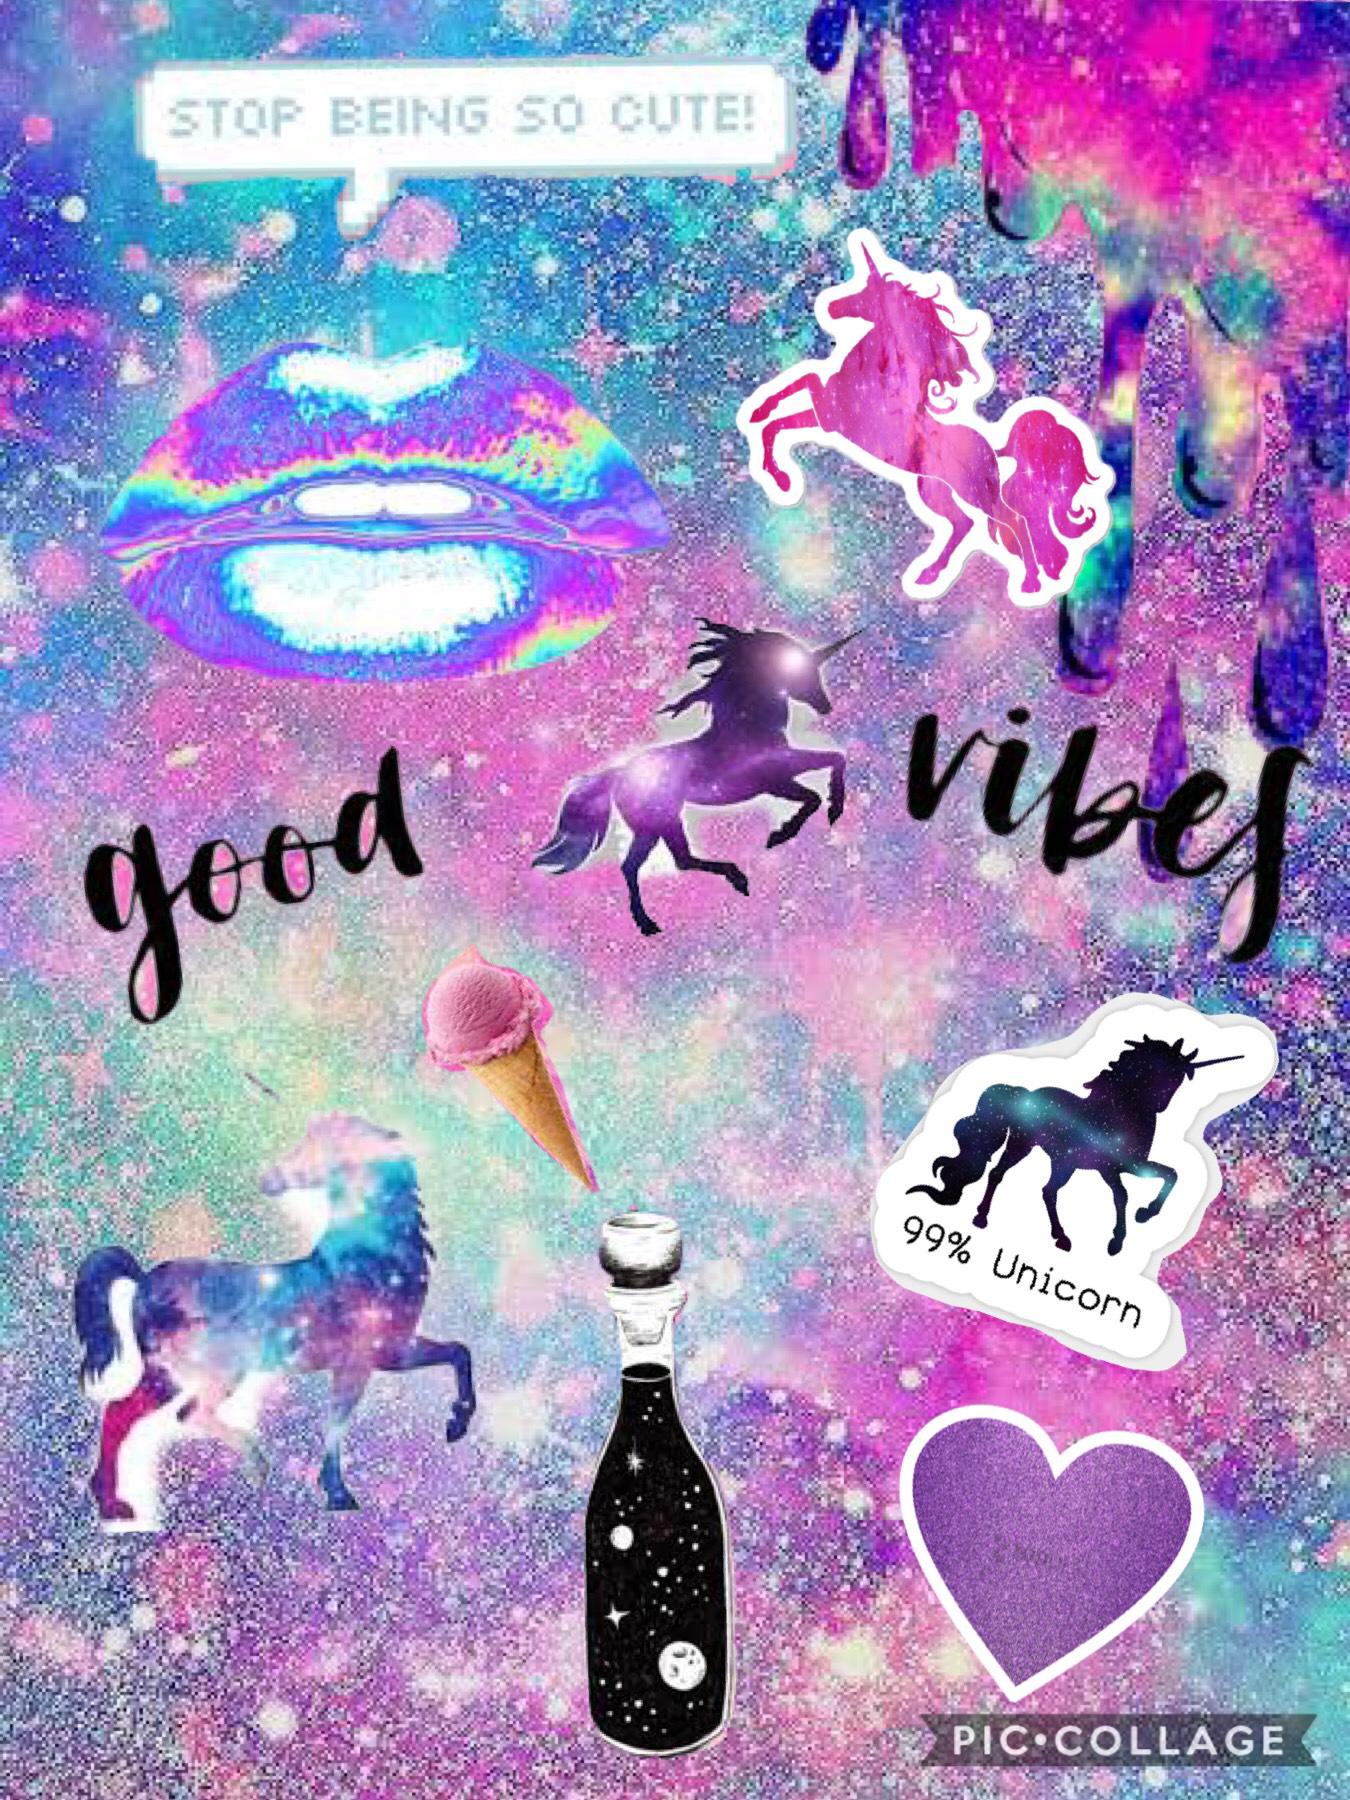 So I love unicorn who ever comments down below they love unicorns they get a shoutout 💜💜